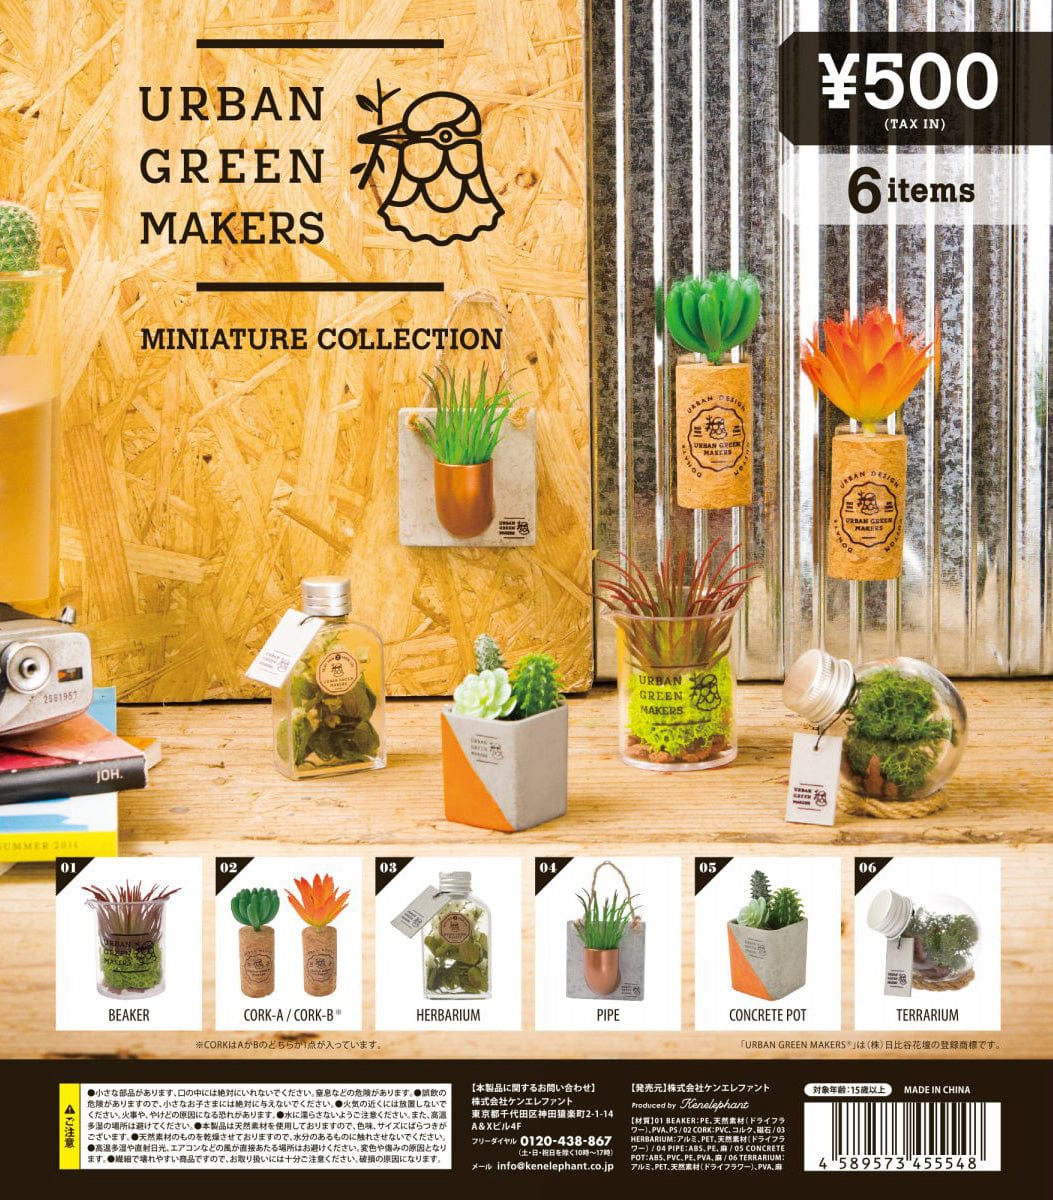 Kenelephant CP0754 Urban Green Makers MINIATURE COLLECTION